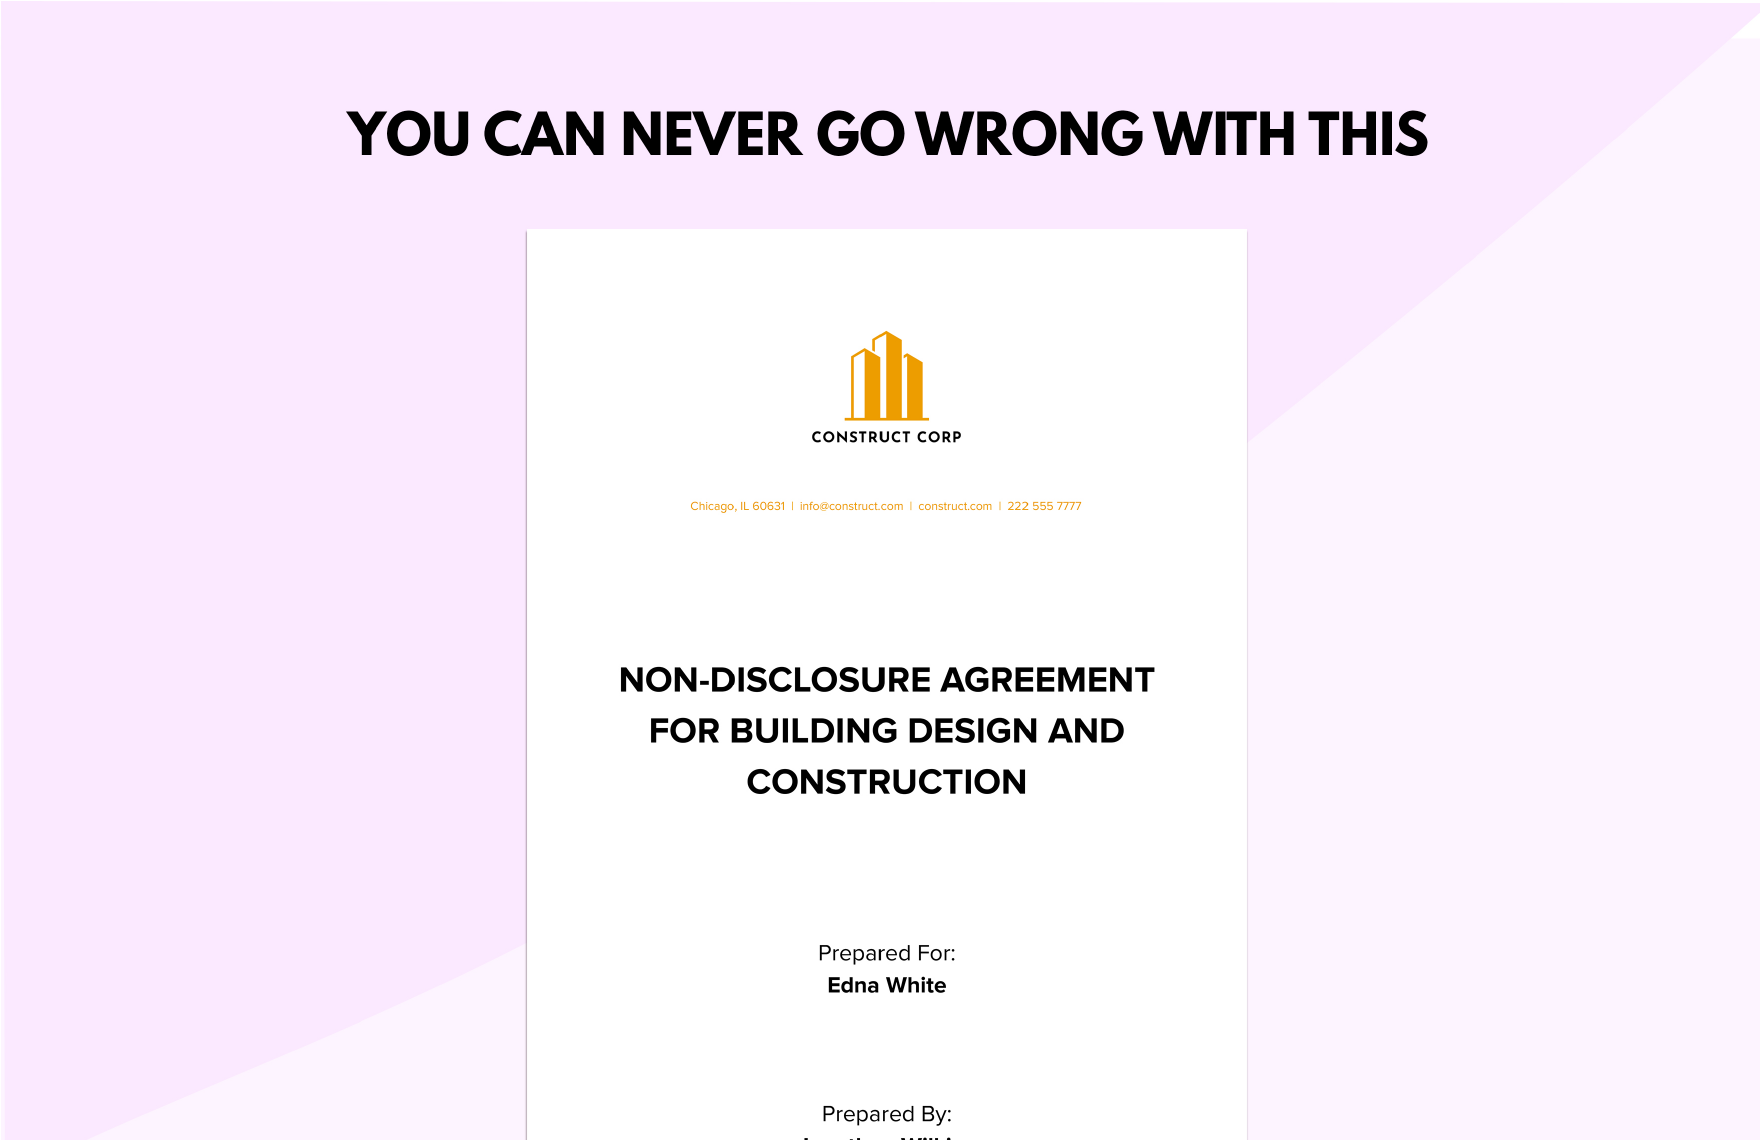 Non-Disclosure Agreement for Building Design and Construction